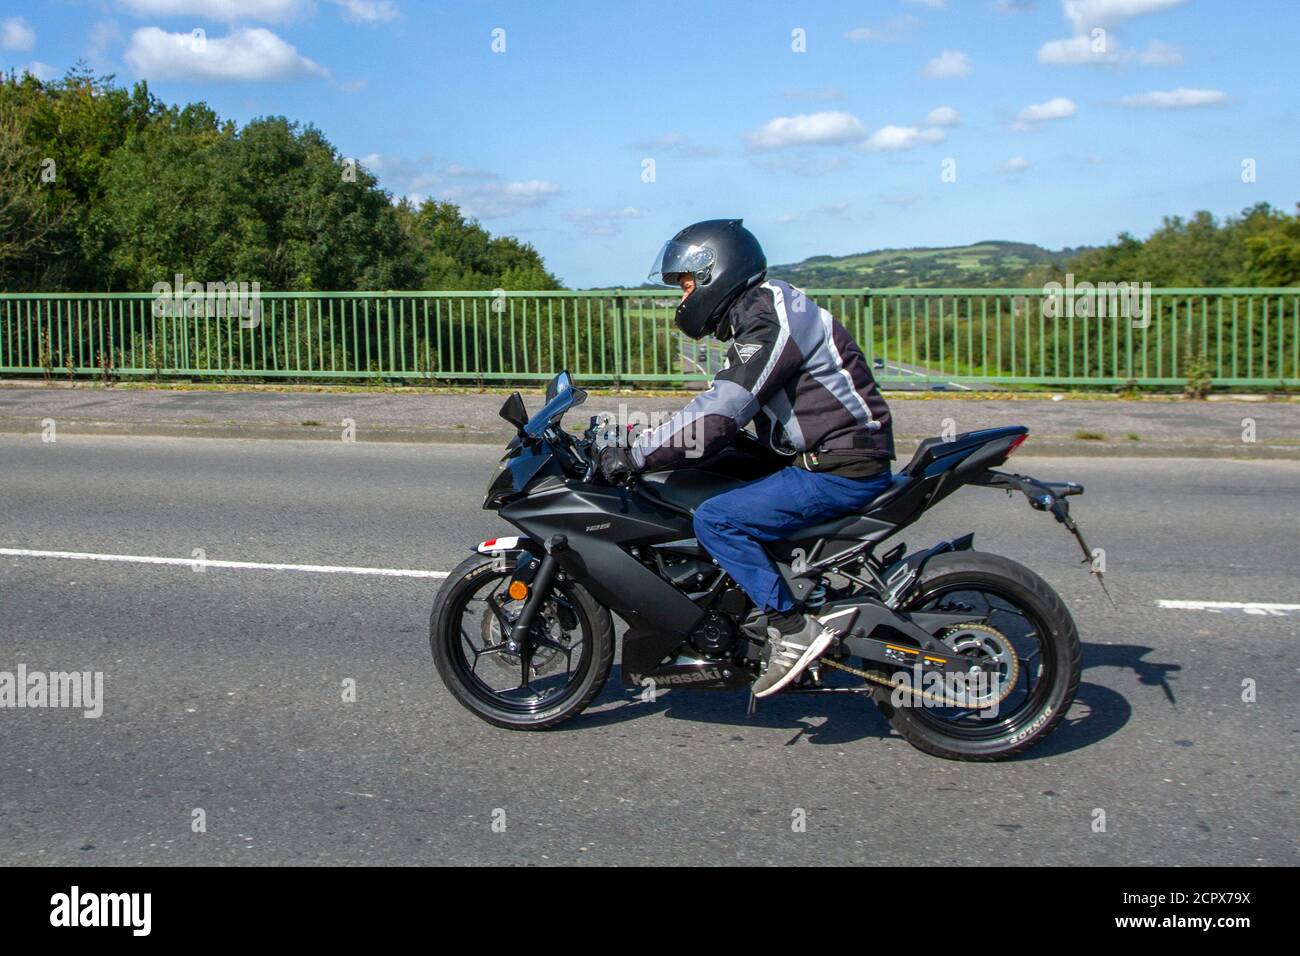 125cc Motorbike High Resolution Stock Photography and Images - Alamy